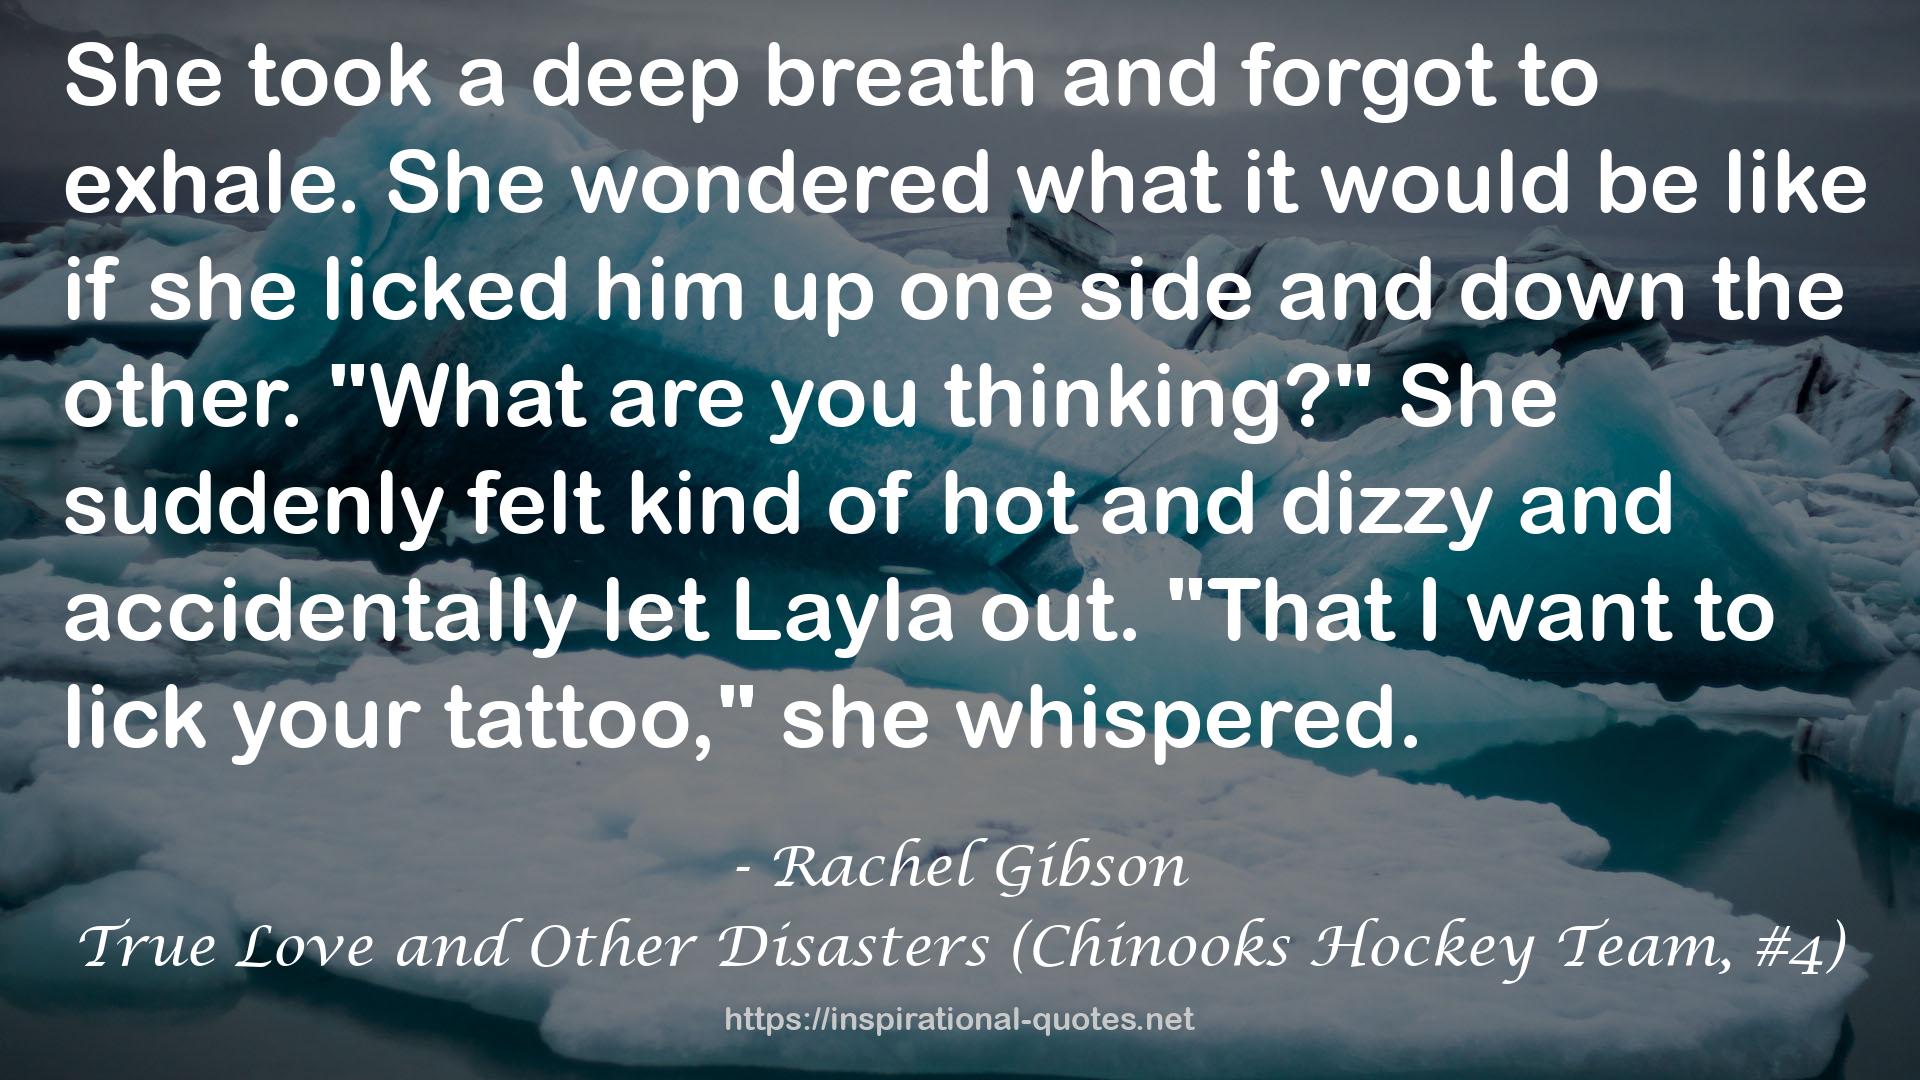 True Love and Other Disasters (Chinooks Hockey Team, #4) QUOTES